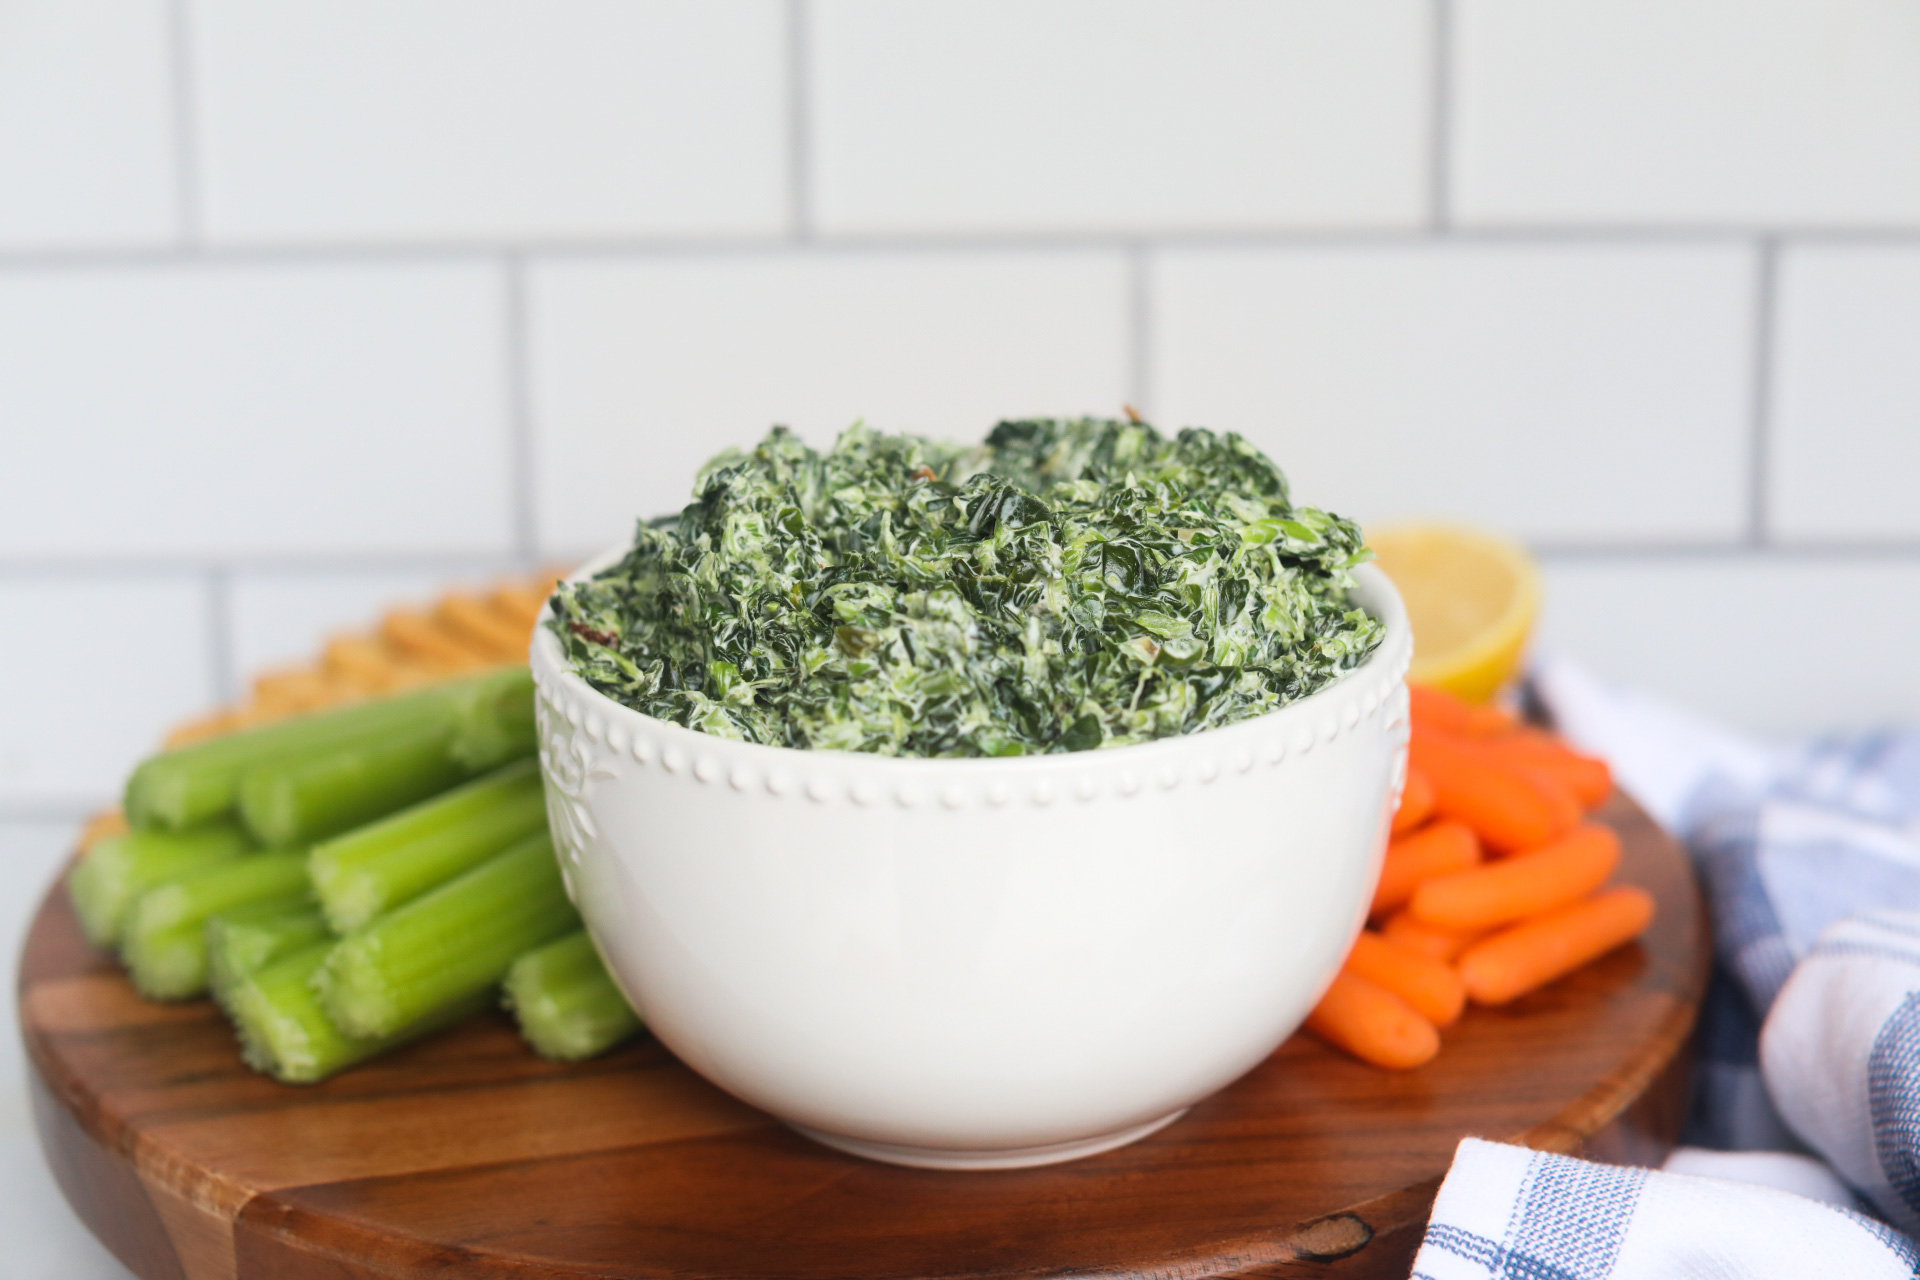 Spinach dip served in a white bowl with carrots, celery and crackers on a wooden circle board.